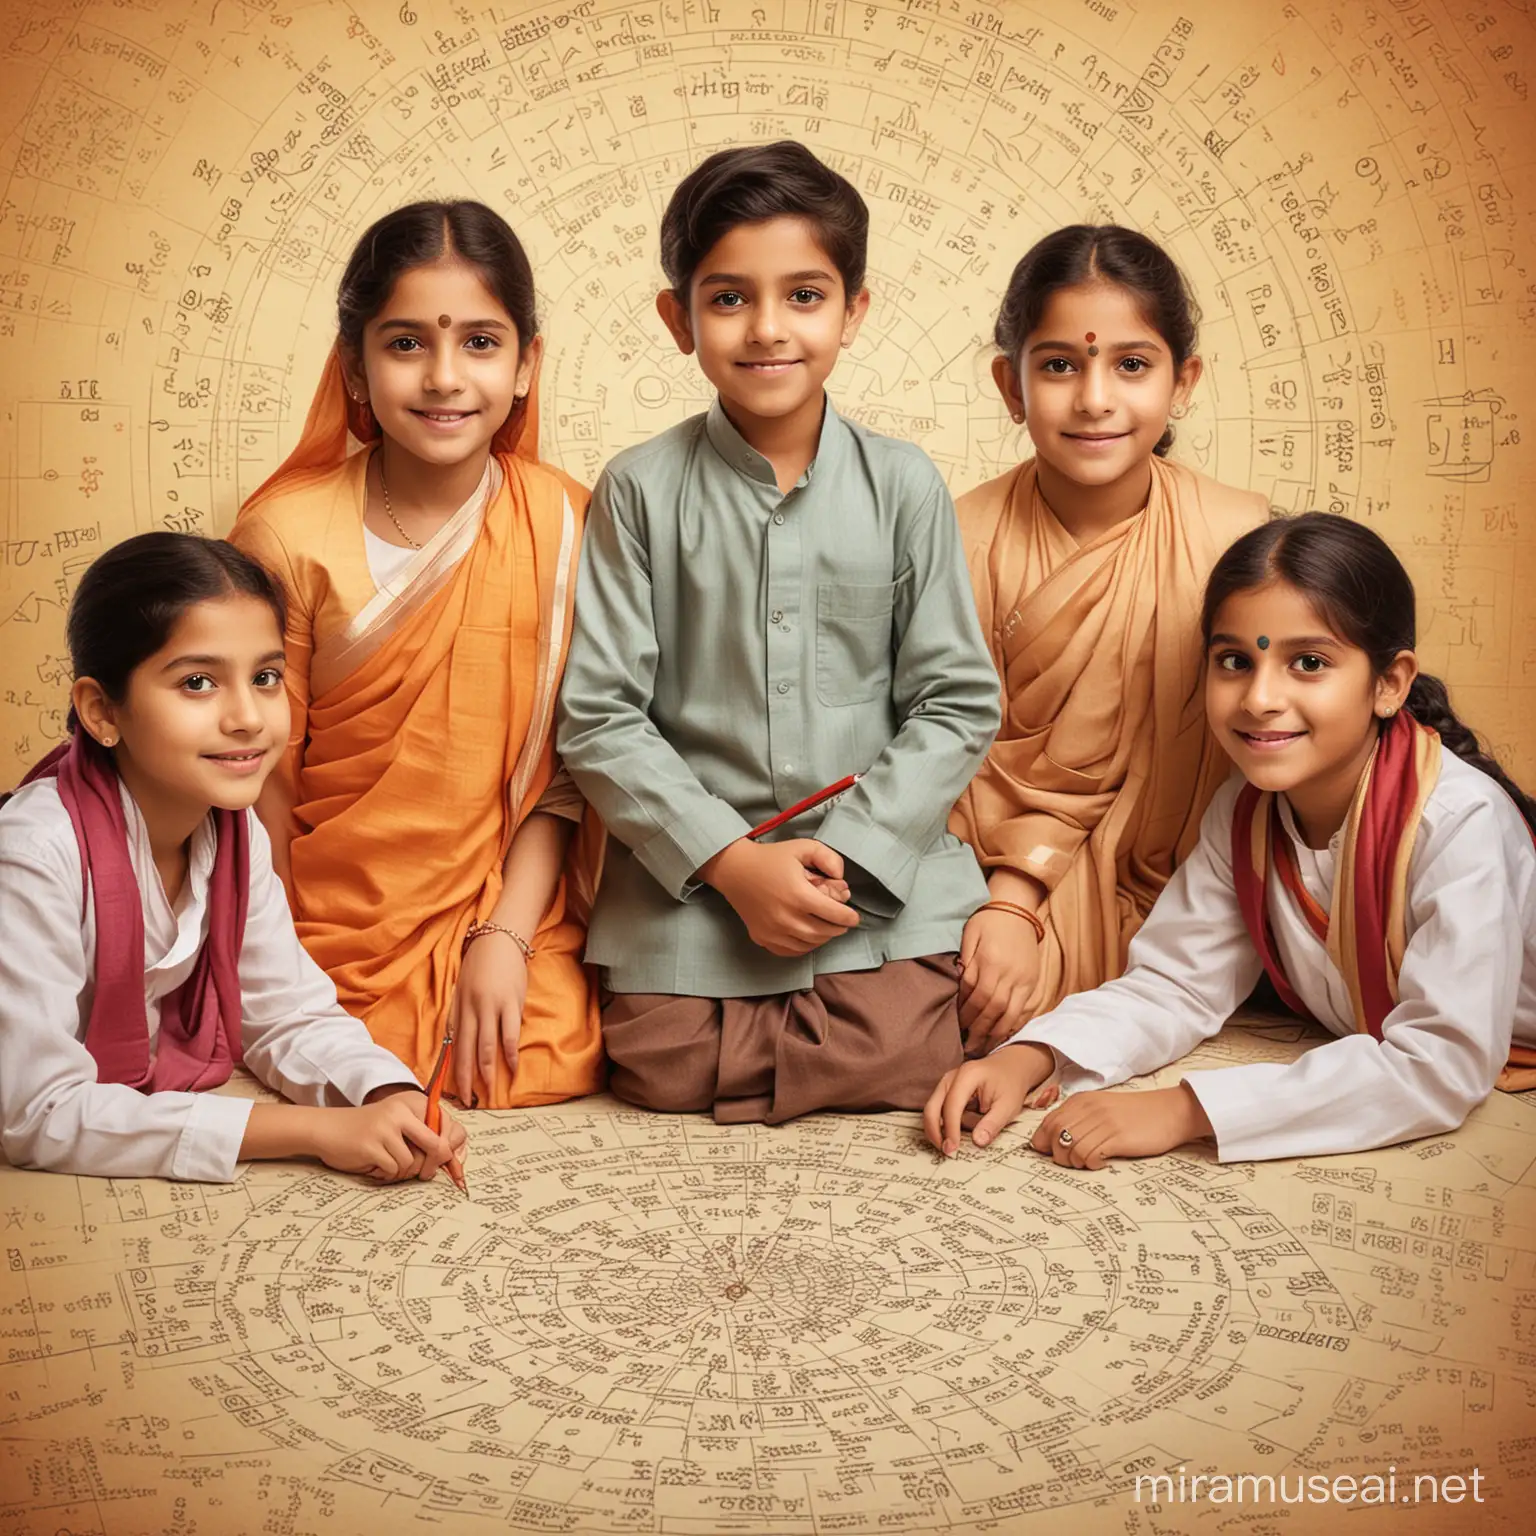 Design a flyer in which boys and girls soving vedic maths in a photo